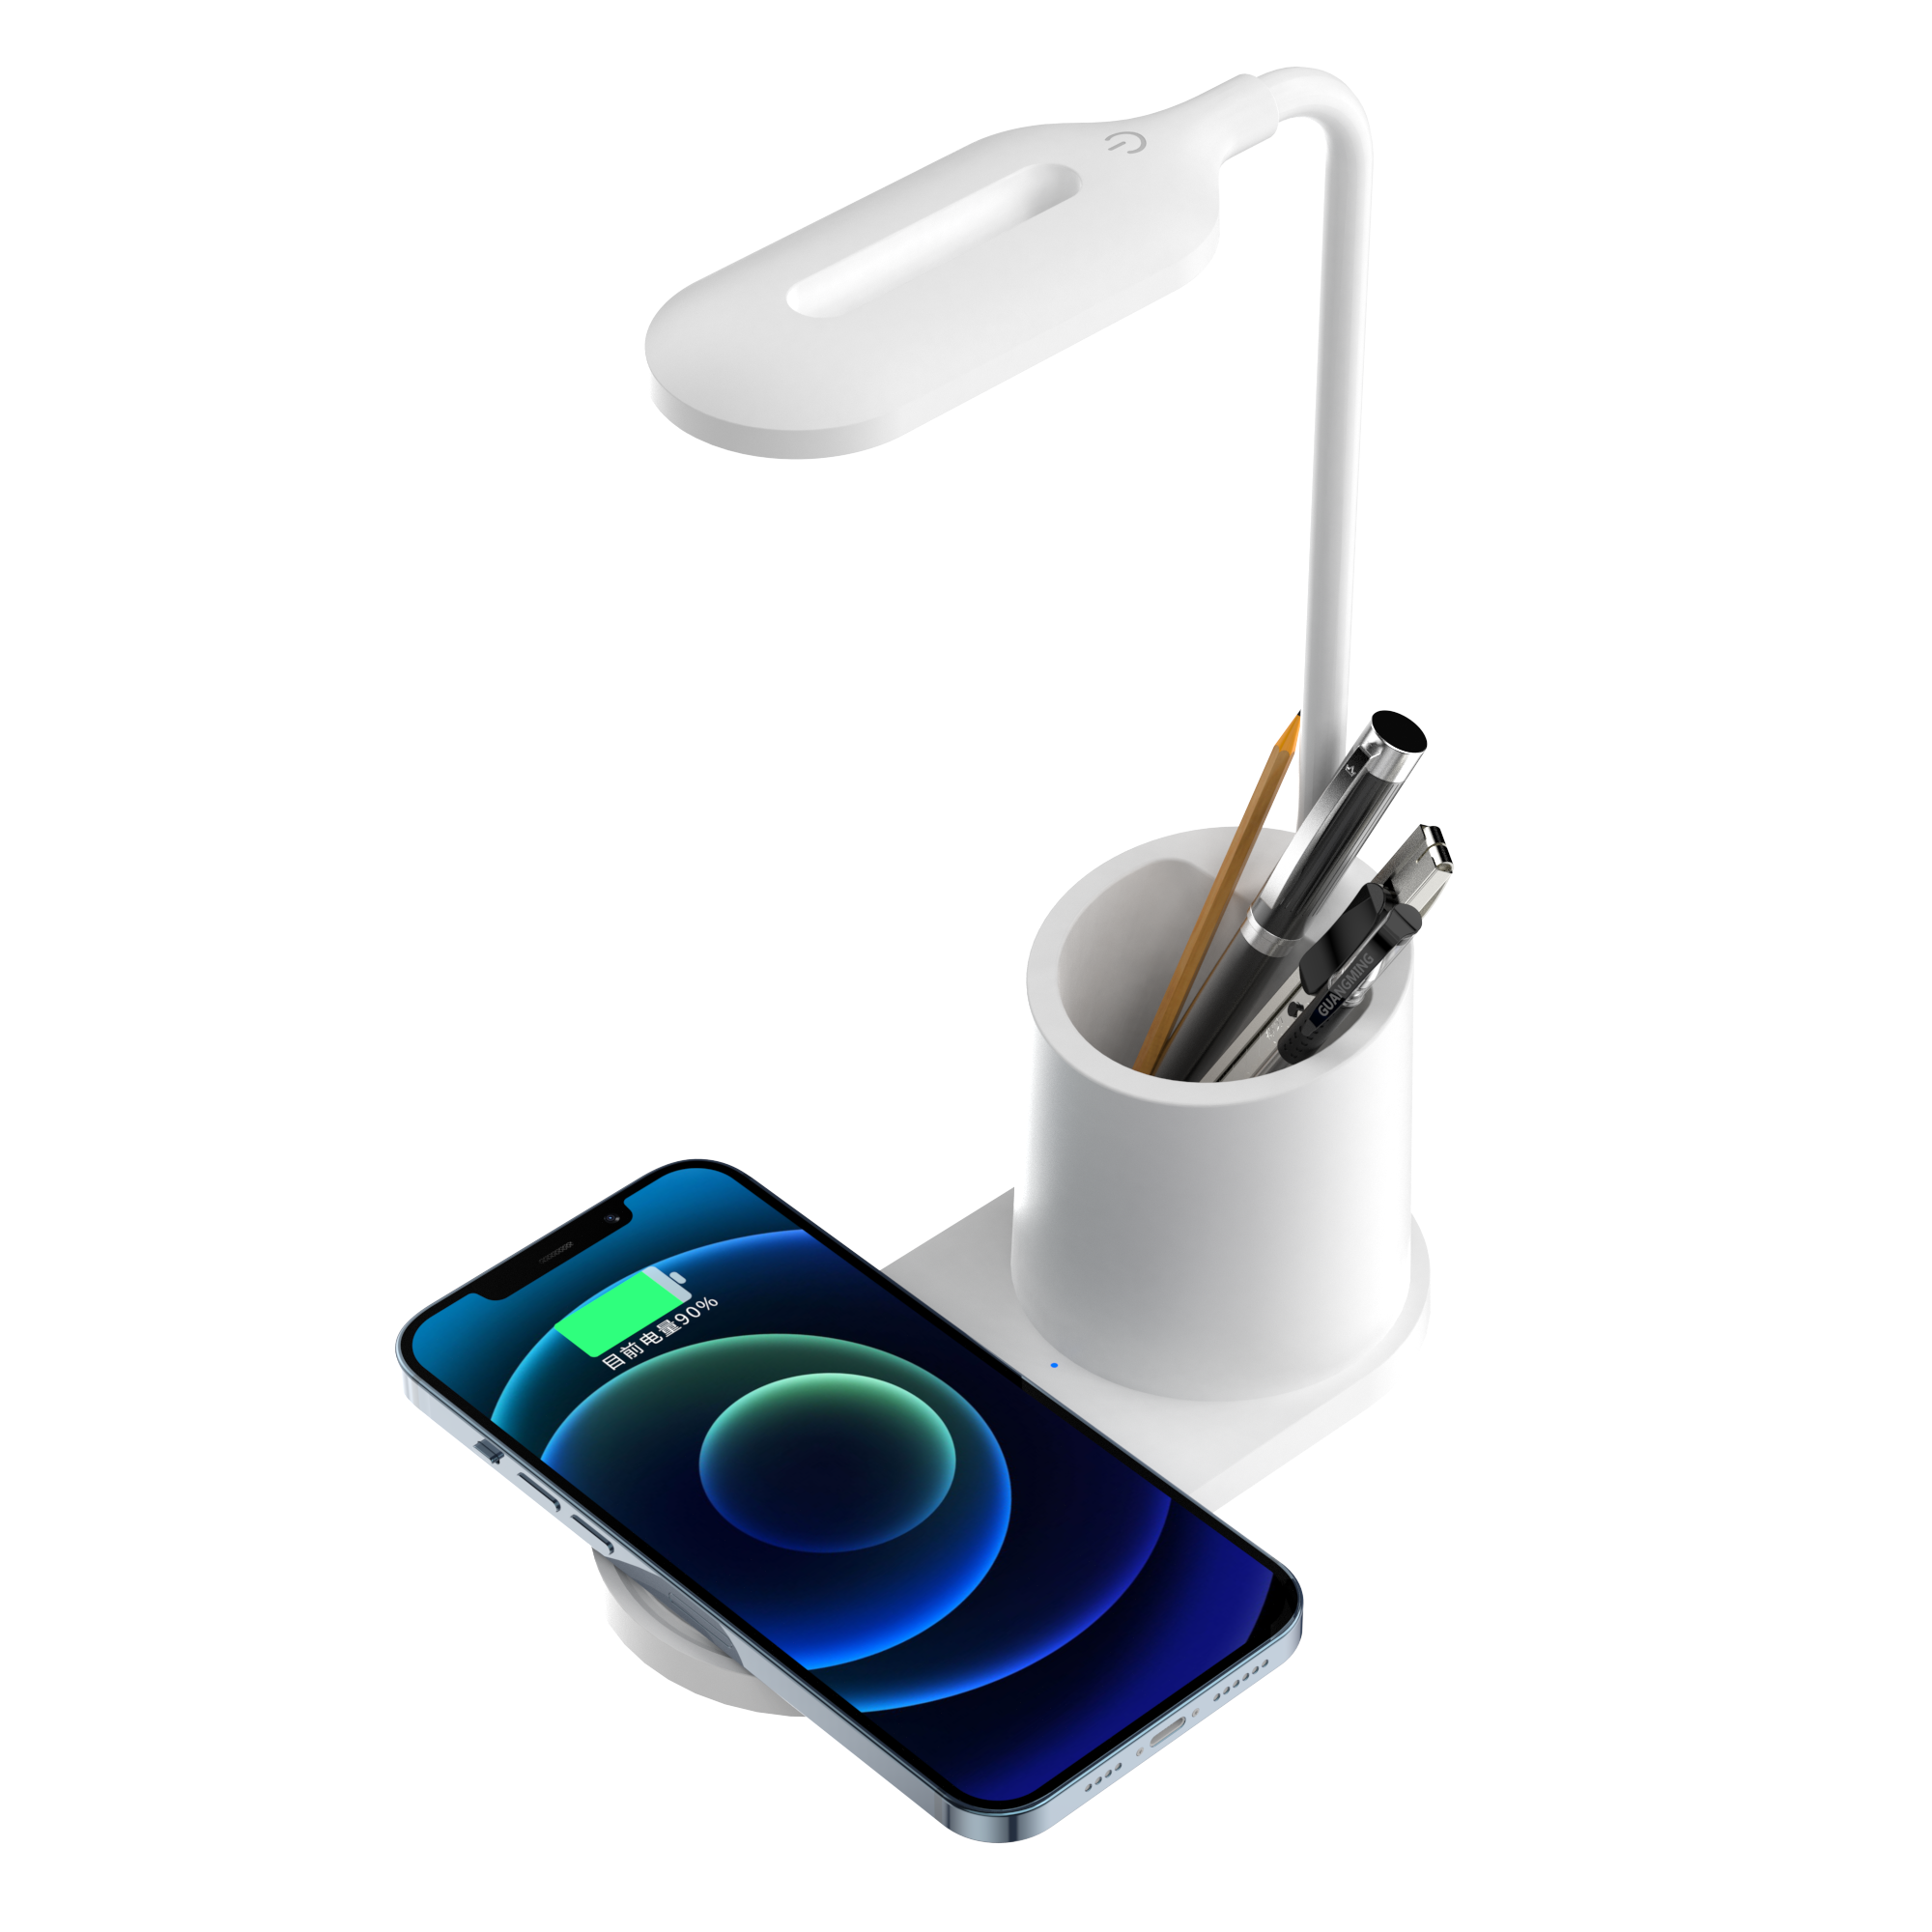 HHT513 New Wireless Charger Eye Protect Light USB Folding Wireless Charger Table Lamp Designer LED Table Lamp For Bedside Reading Room